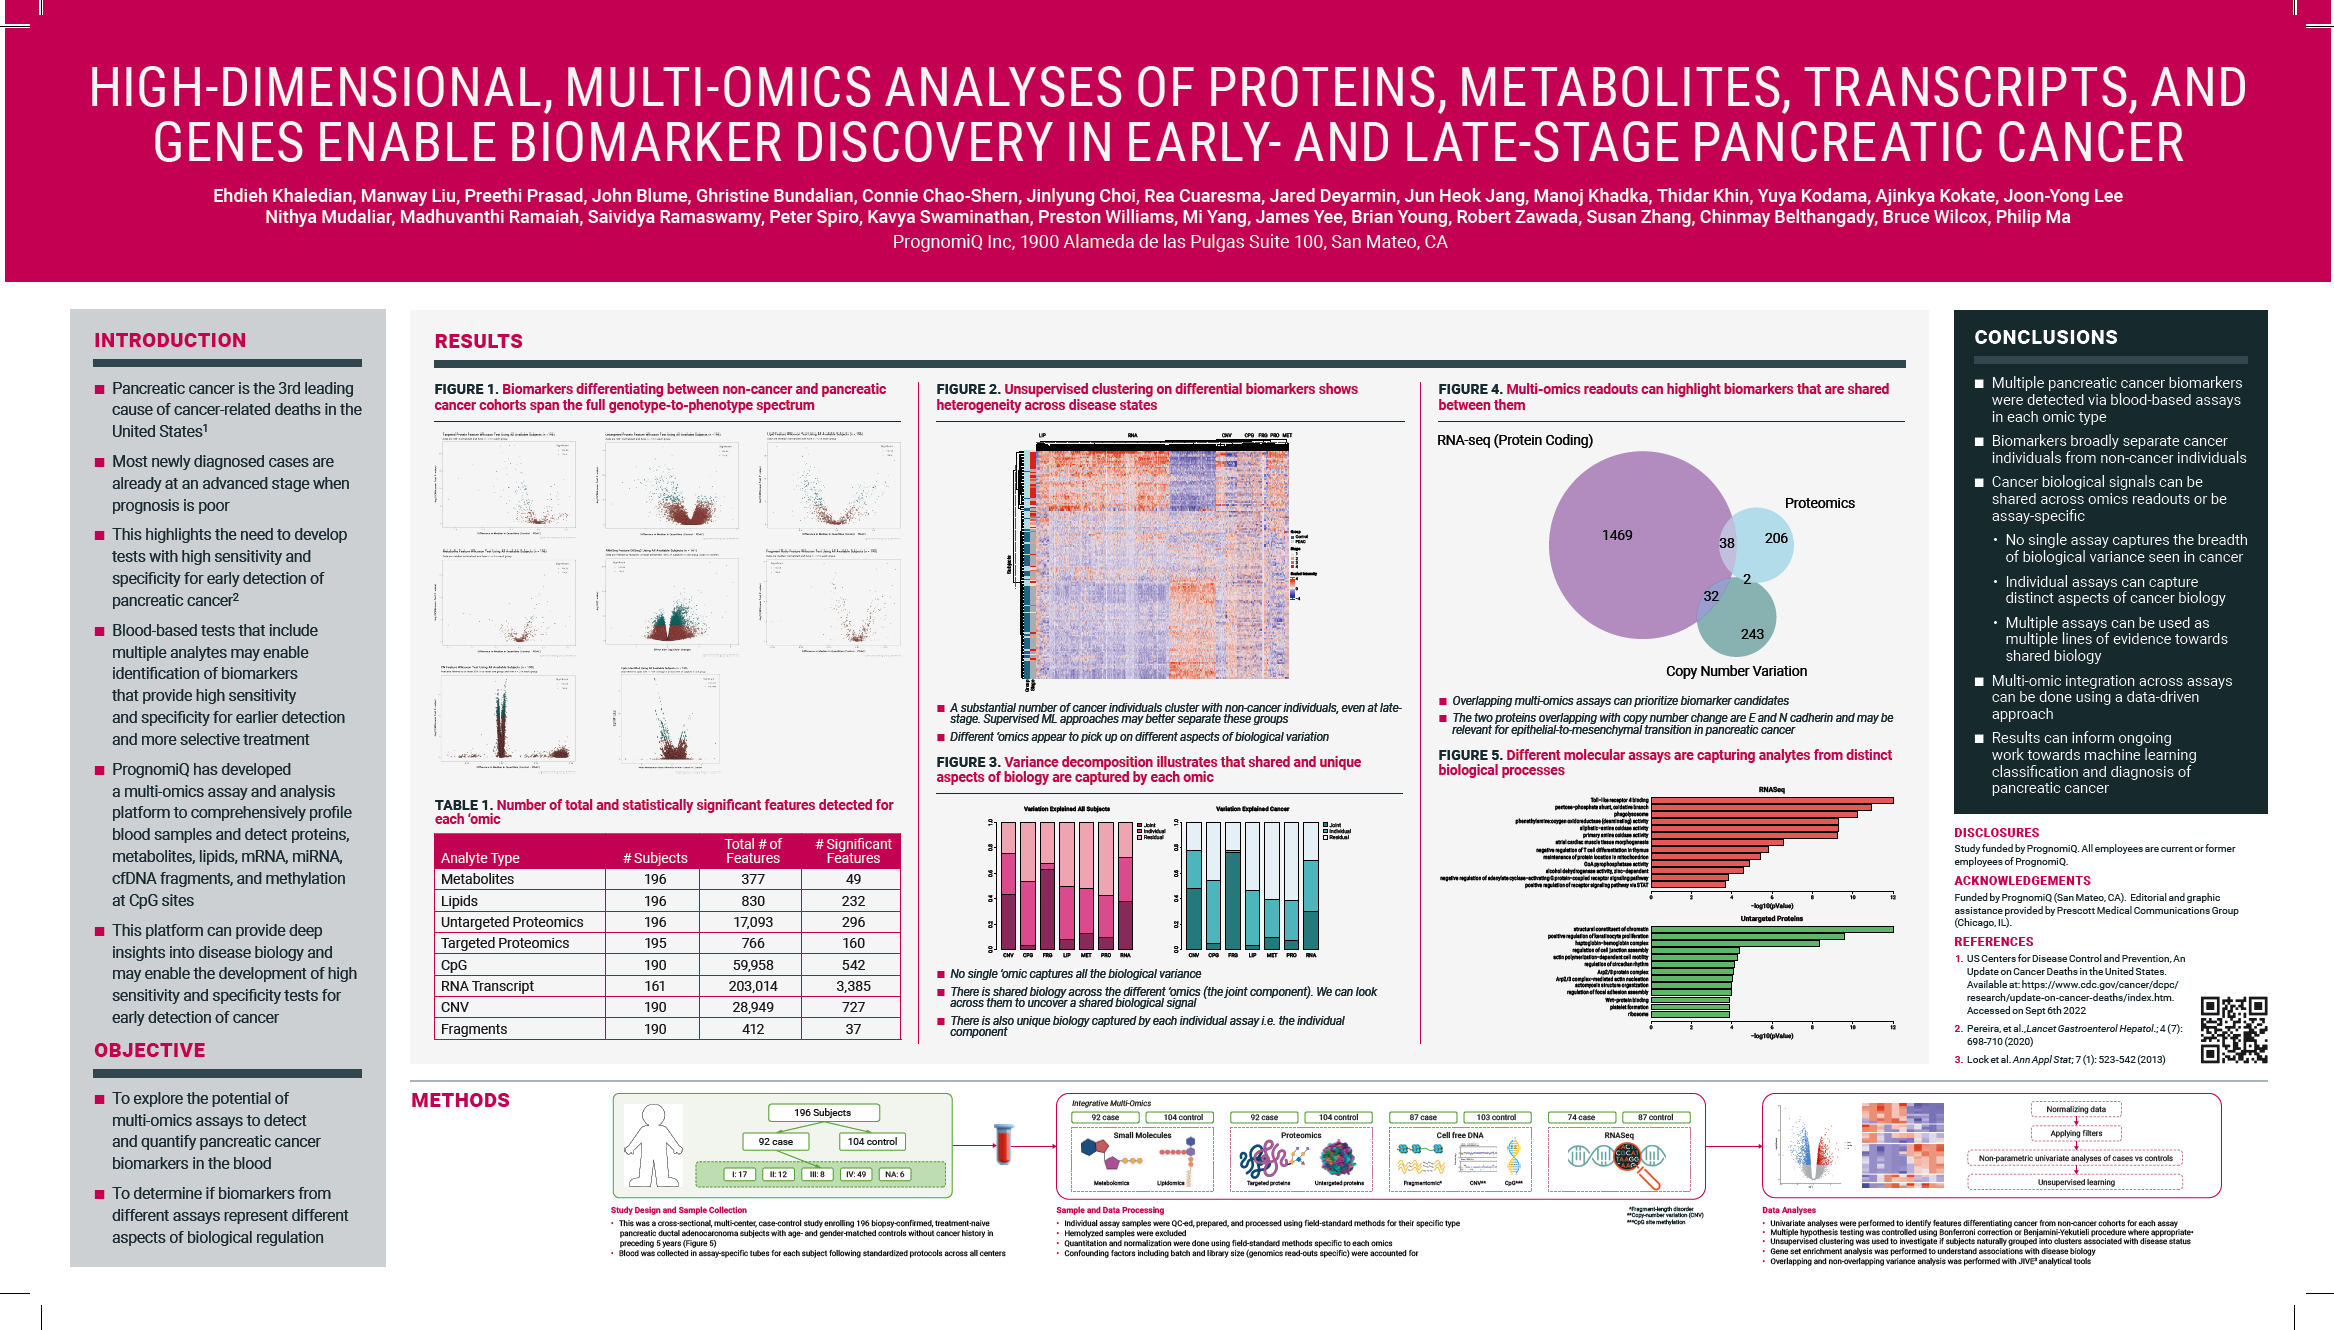 scientific poster showing high-dimensional, multi-omics analyses of proteins, metabolites, transcripts, and genes enable biomarker discovery in early- and late-stage pancreatic cancer